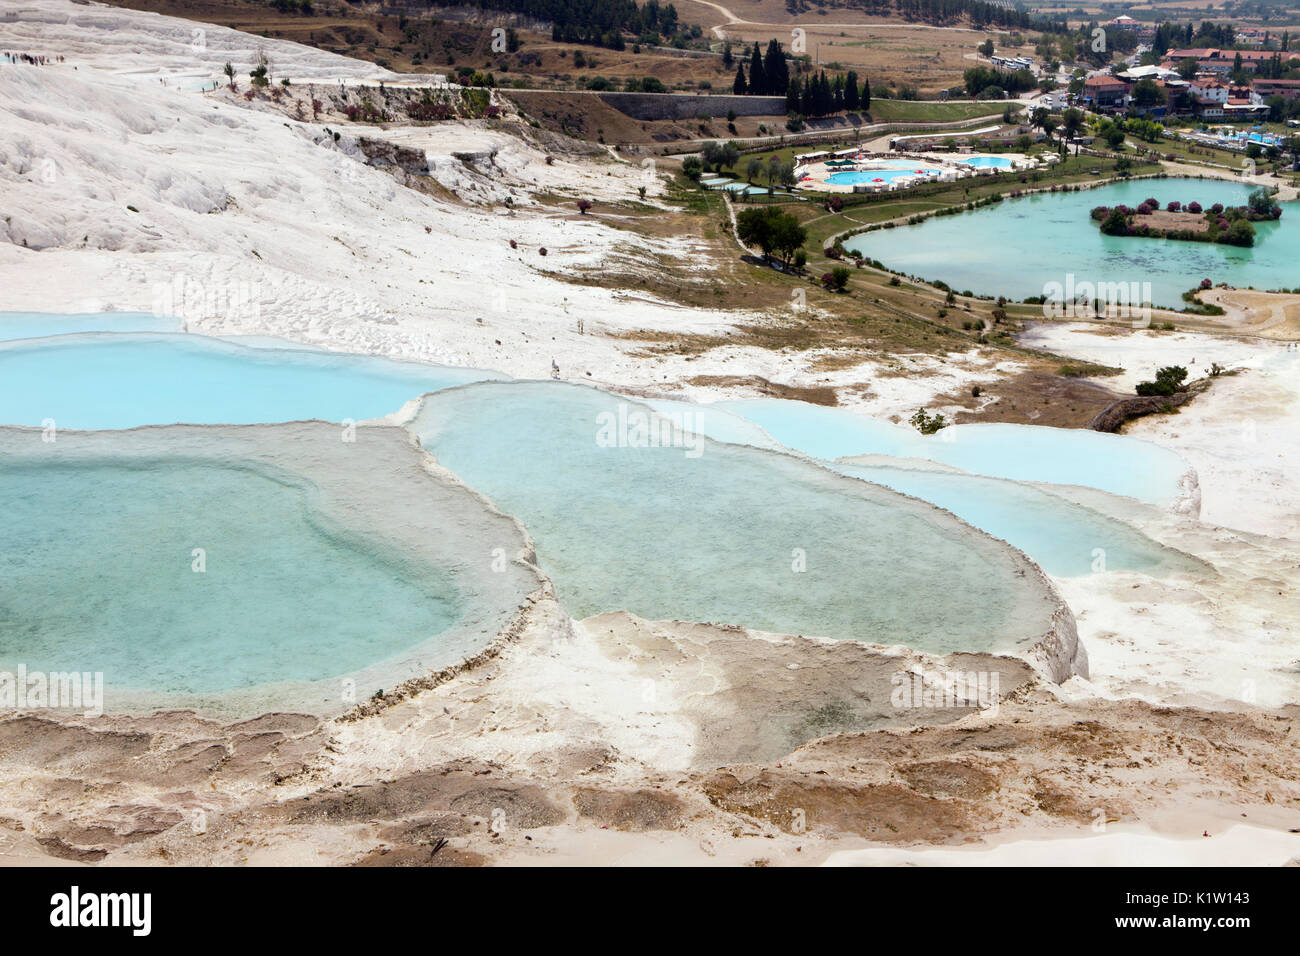 Image of the Pamukkale Cotton terrace pools in Turkey. Stock Photo